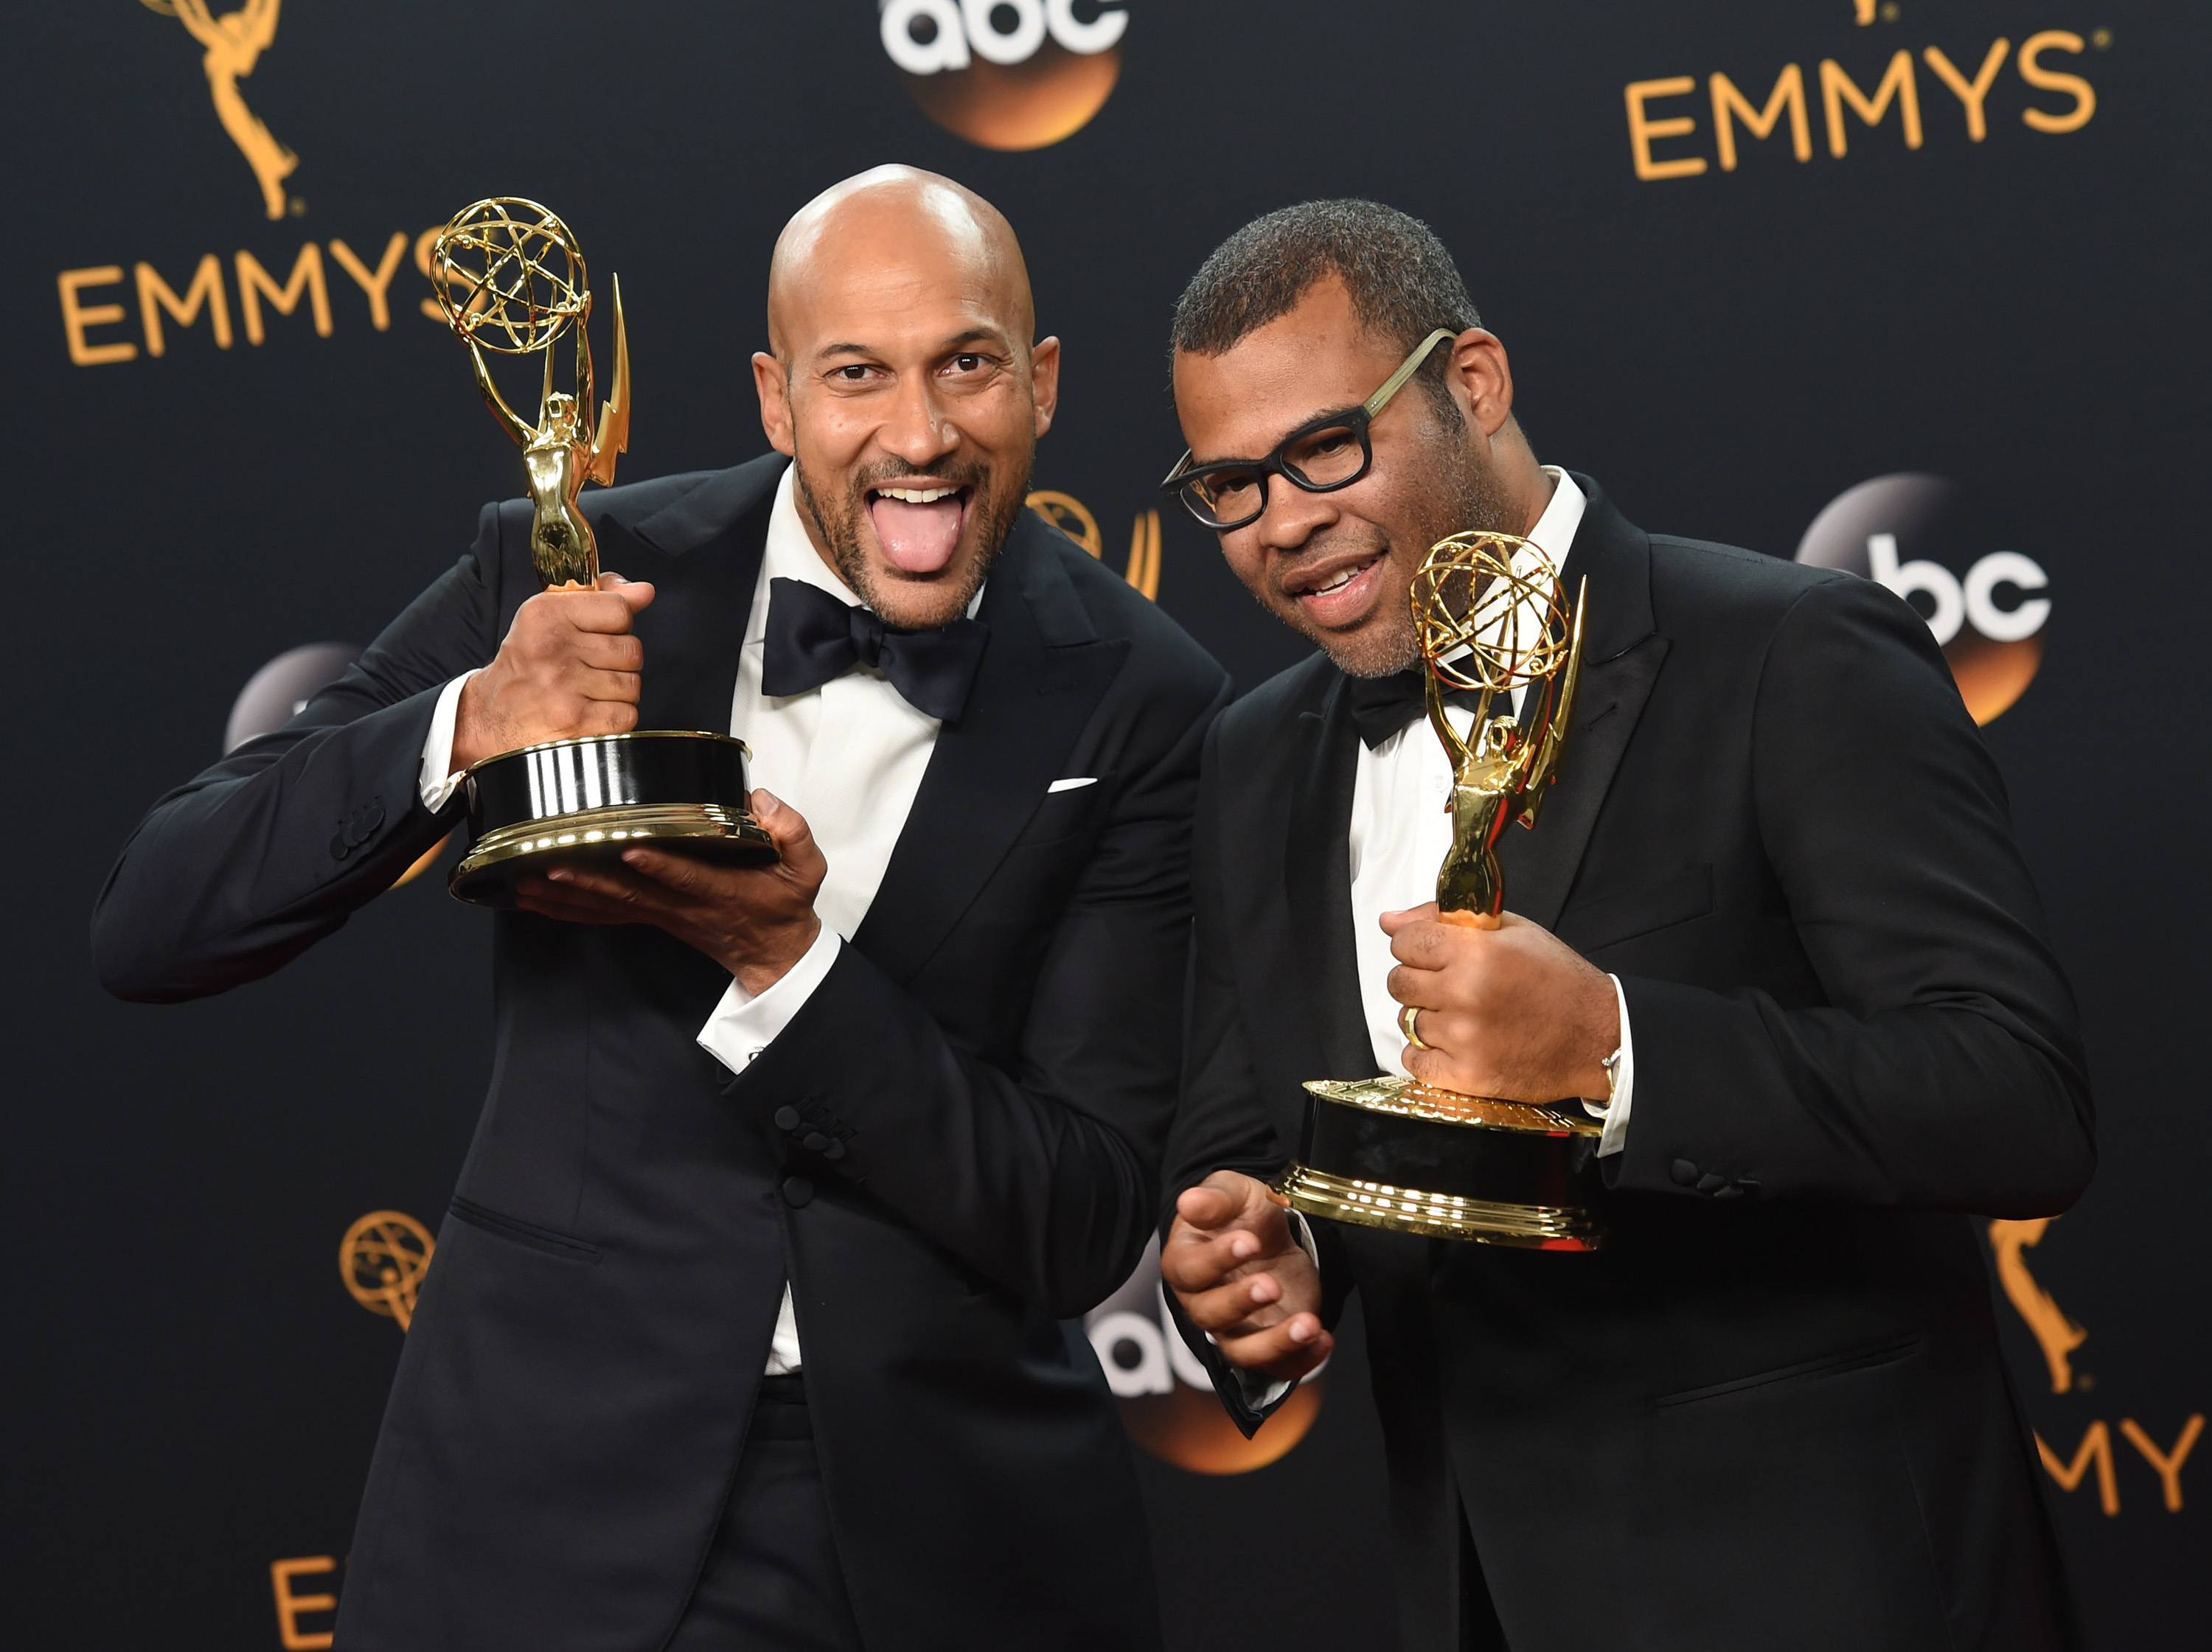 Emmys Fugs and Fabs: The Rest of the Dudes